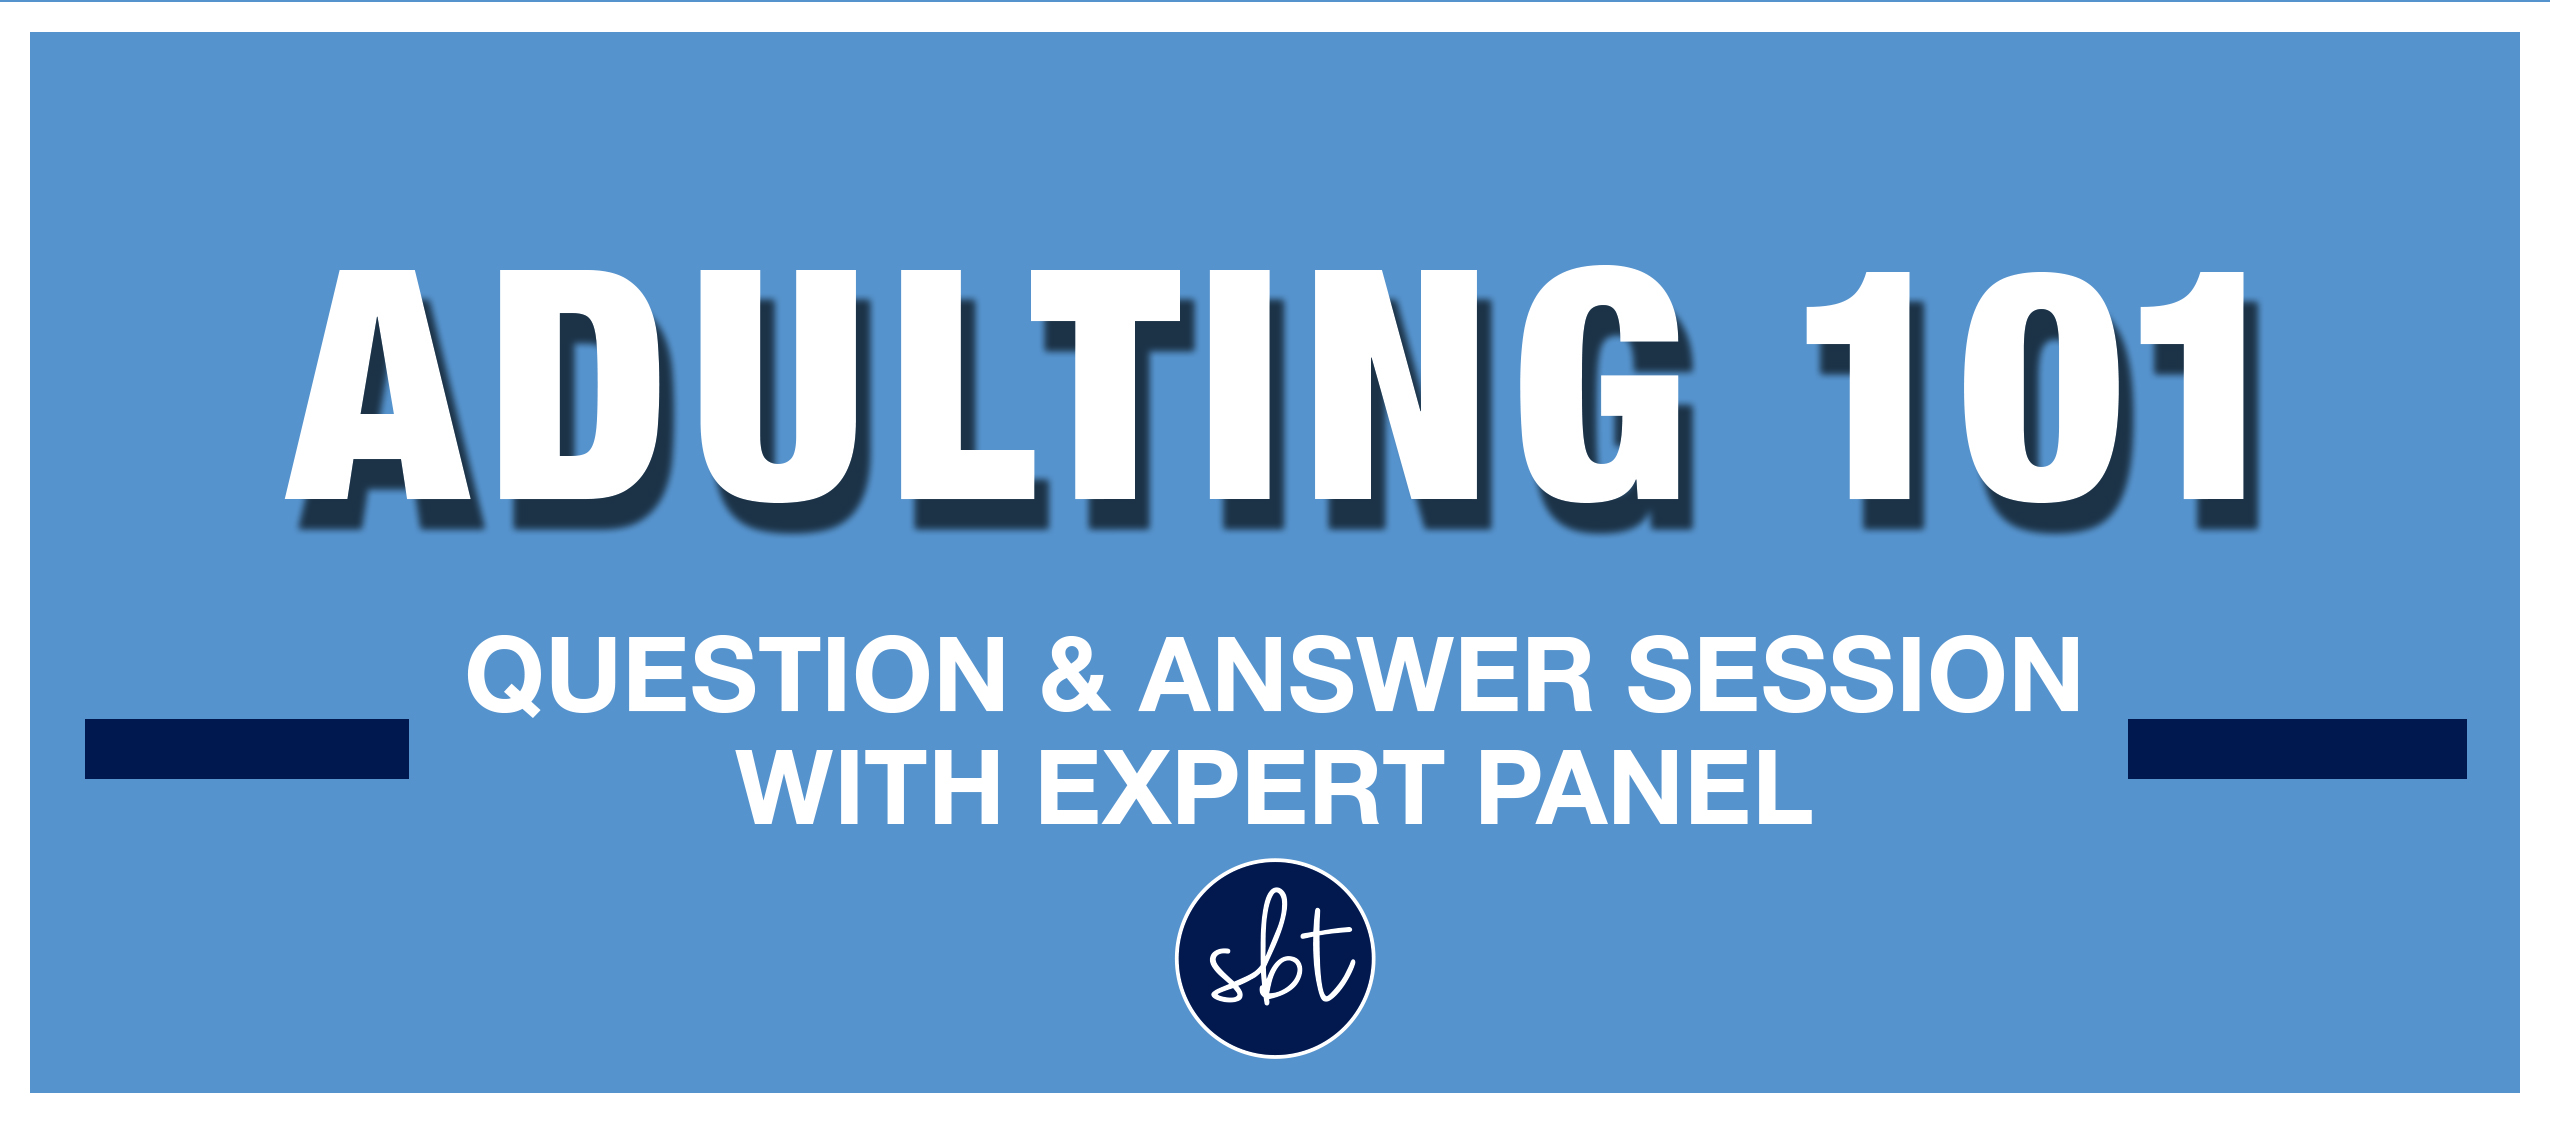 Adulting 101 – Expert Panel